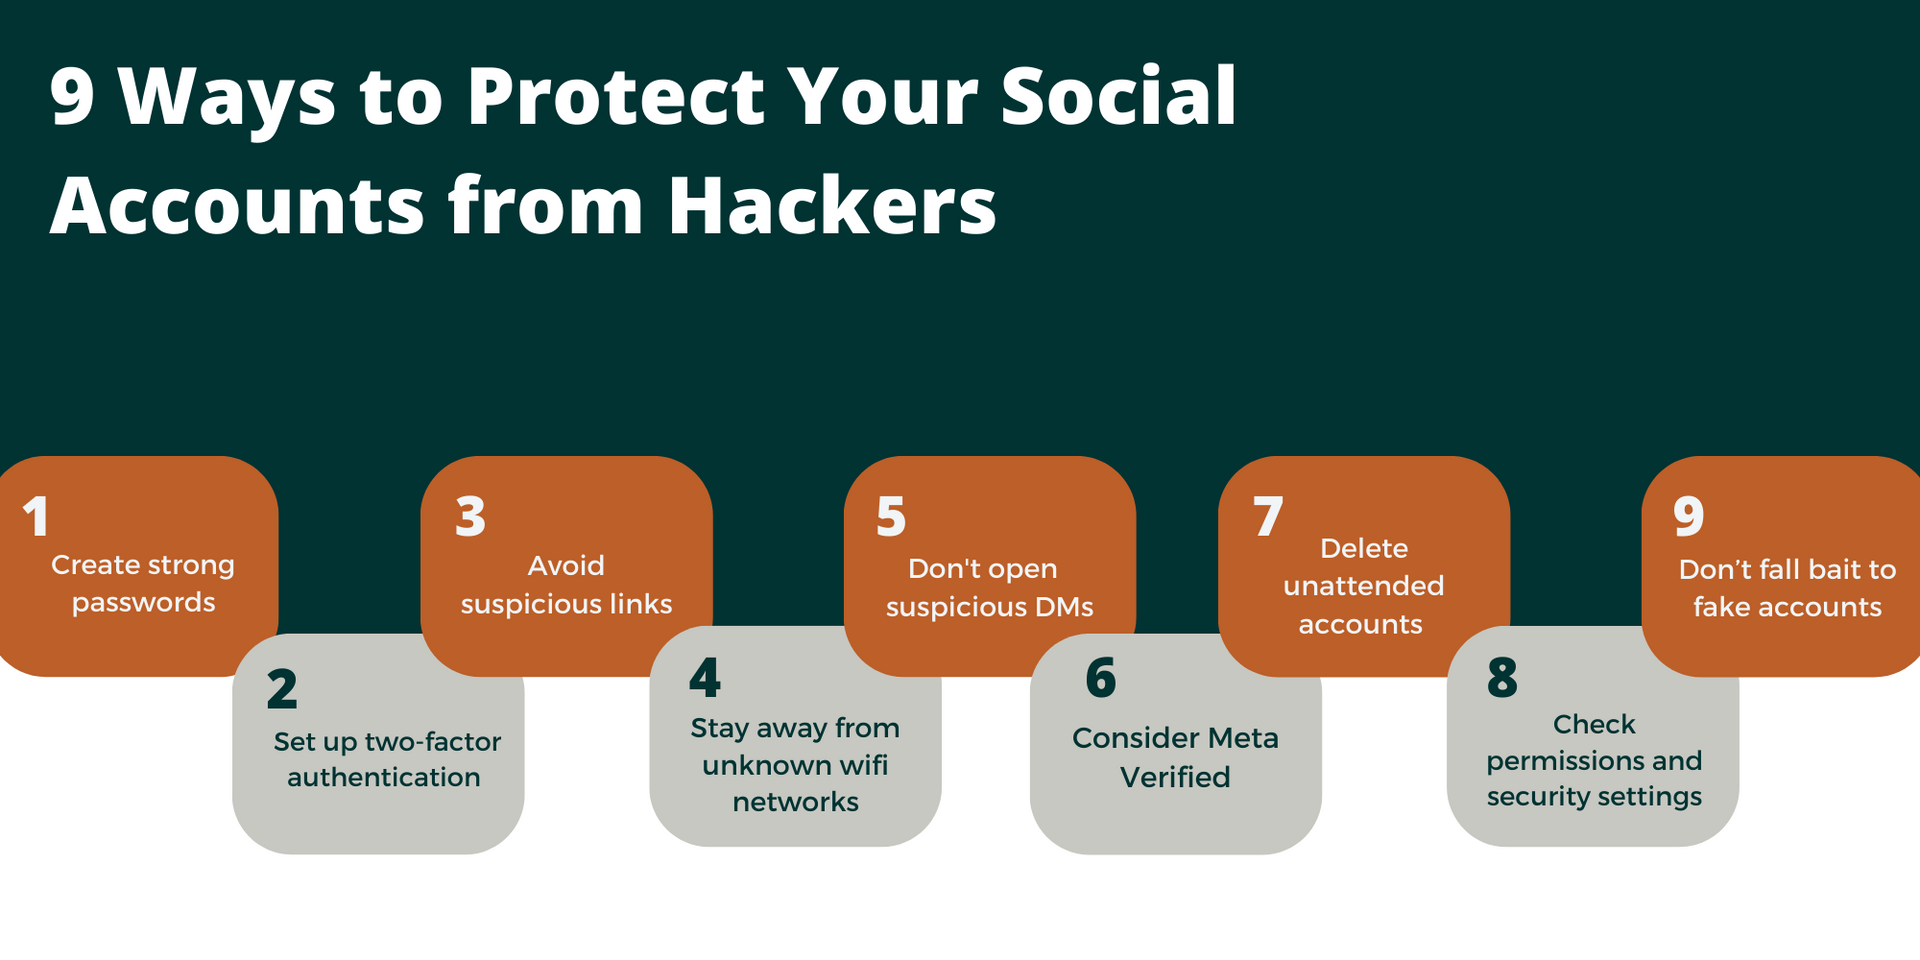 9 Ways to Protect Your Social Media Accounts from Hackers